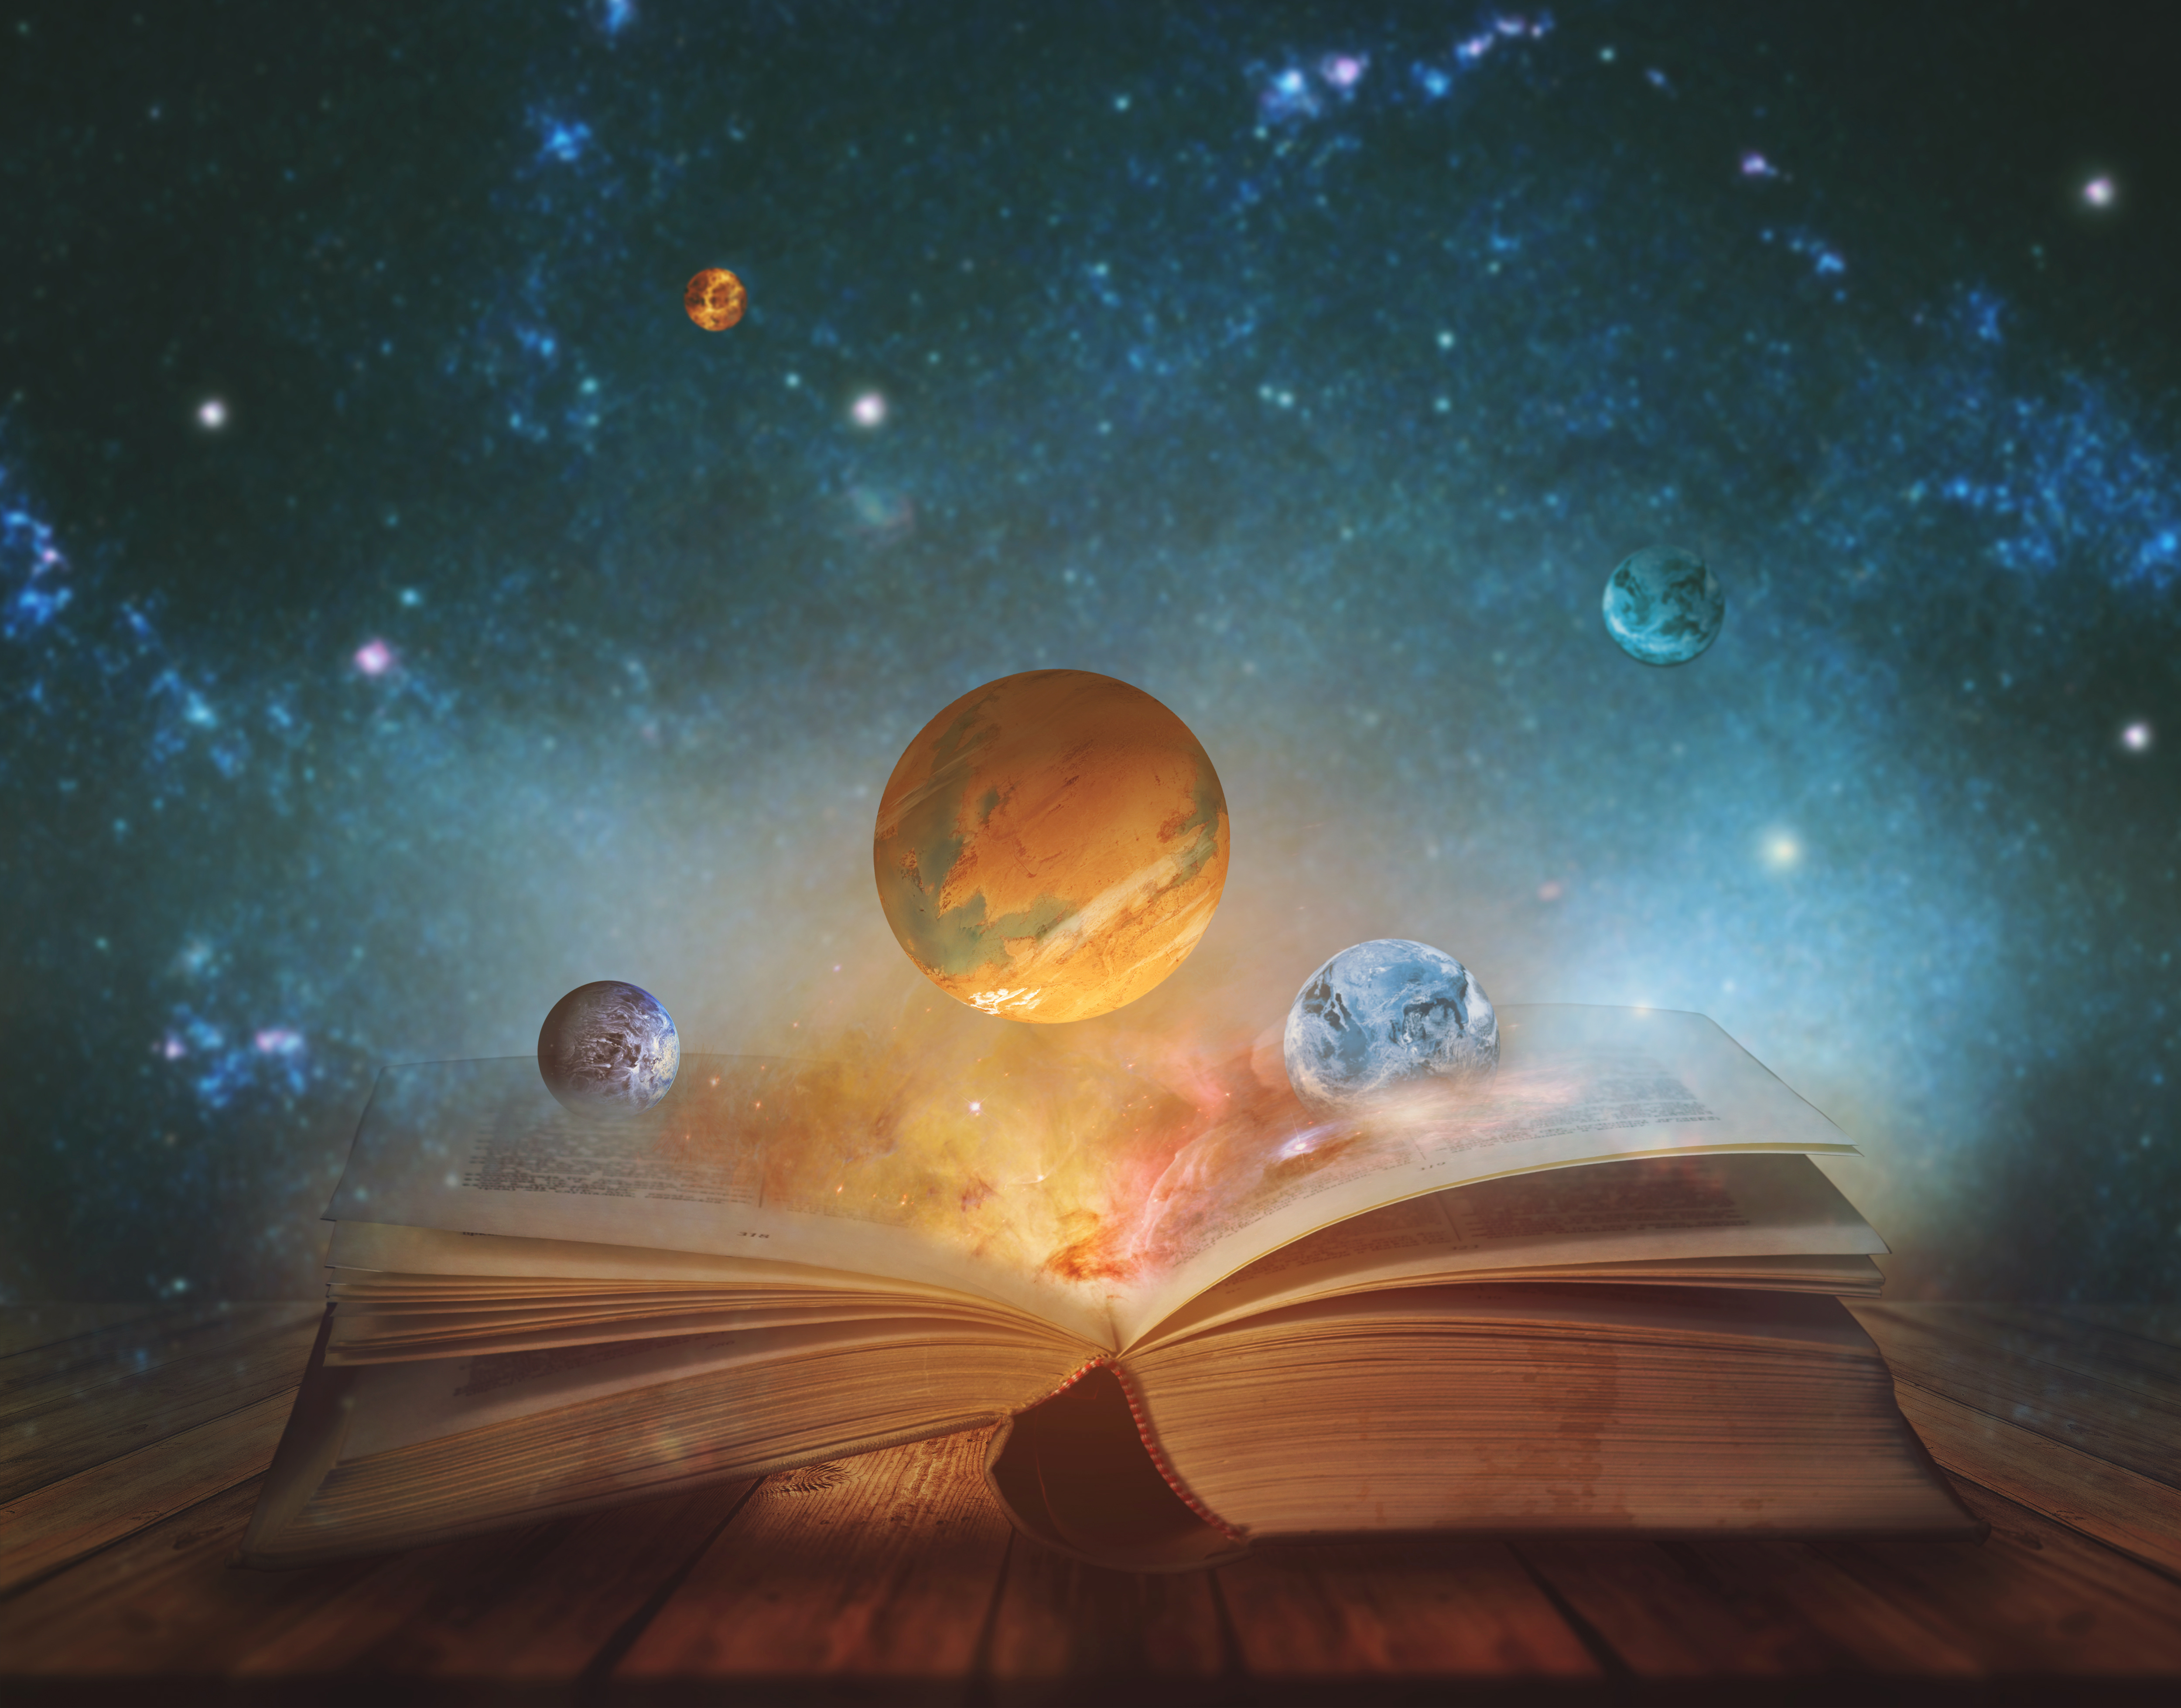 An image of planets and an open book